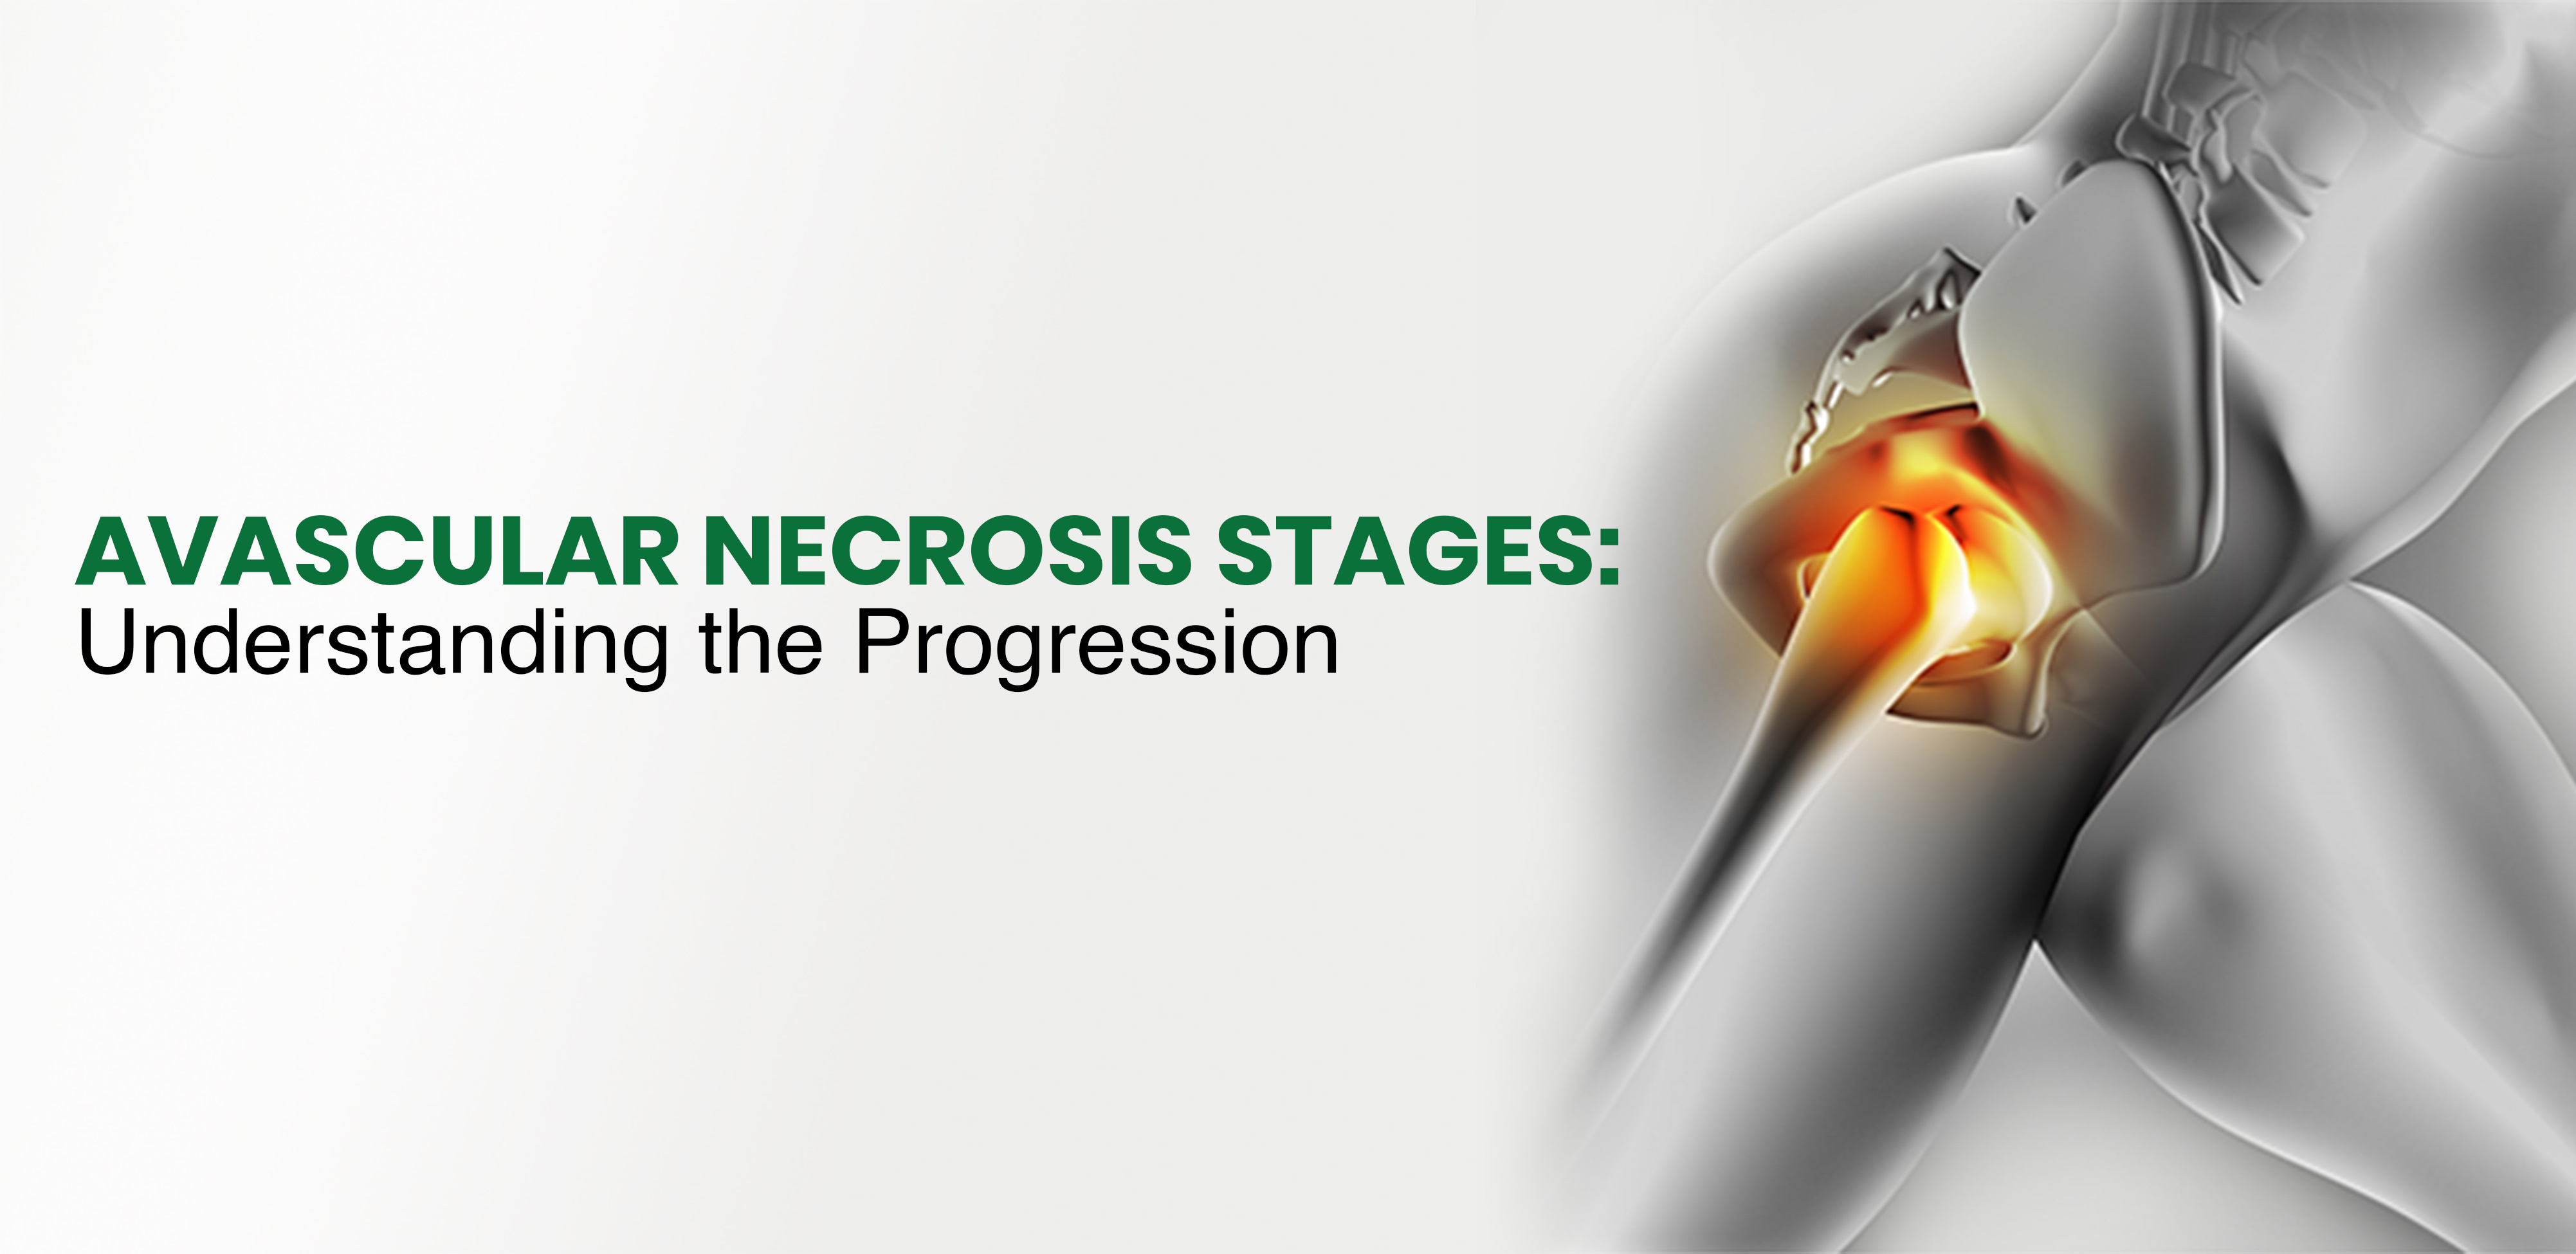 Avascular Necrosis Stages: Understanding the Progression by regrow ...